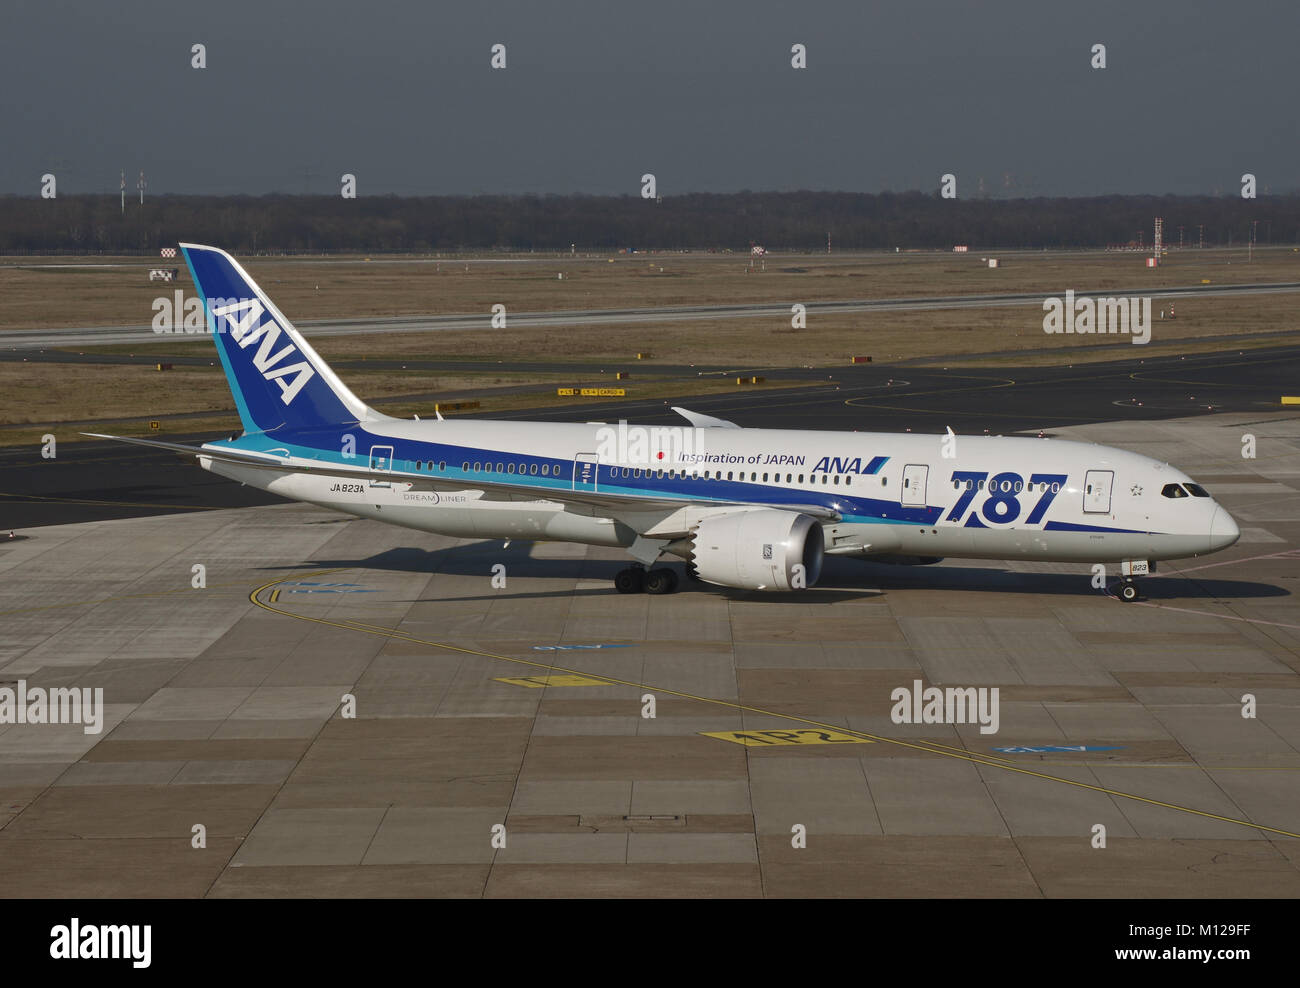 Duesseldorf, Germany - March 17, 2015: Boeing 787-8 of All Nippon Airways (ANA) at the airport of Duesseldorf leaving taxiway Stock Photo